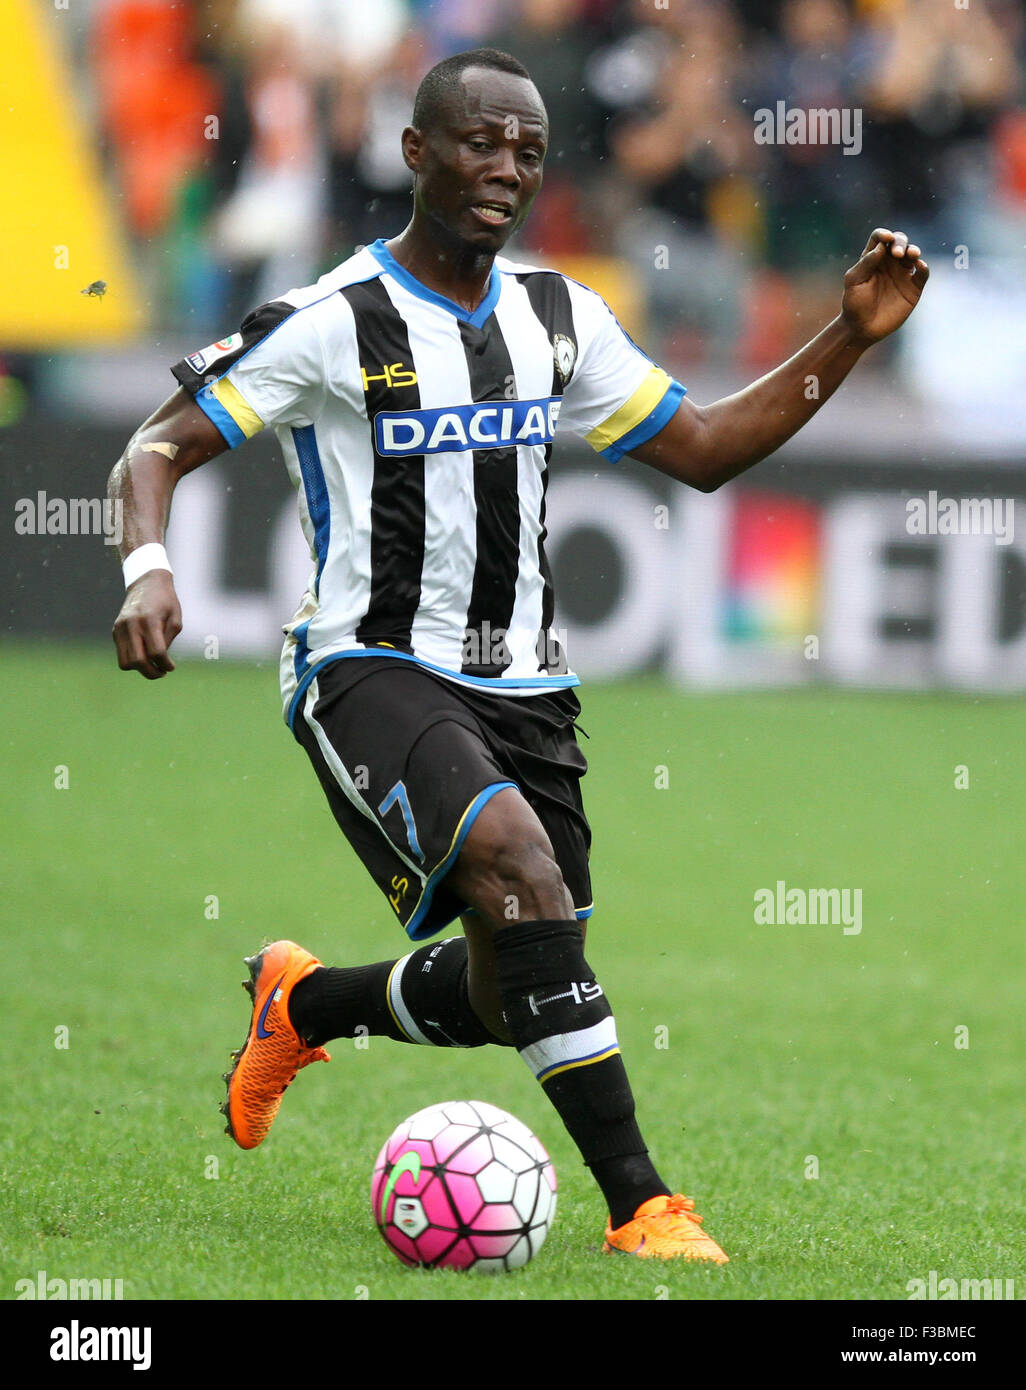 Udine, Italy. 4th October, 2015. Udinese's midfielder Emmanuel Agyemang Badu runs with the ball during the Italian Serie A football match between Udinese Calcio v Genoa Cfc at Friuli Stadium on 4 October, 2015 at Udine. Credit:  Andrea Spinelli/Alamy Live News Stock Photo